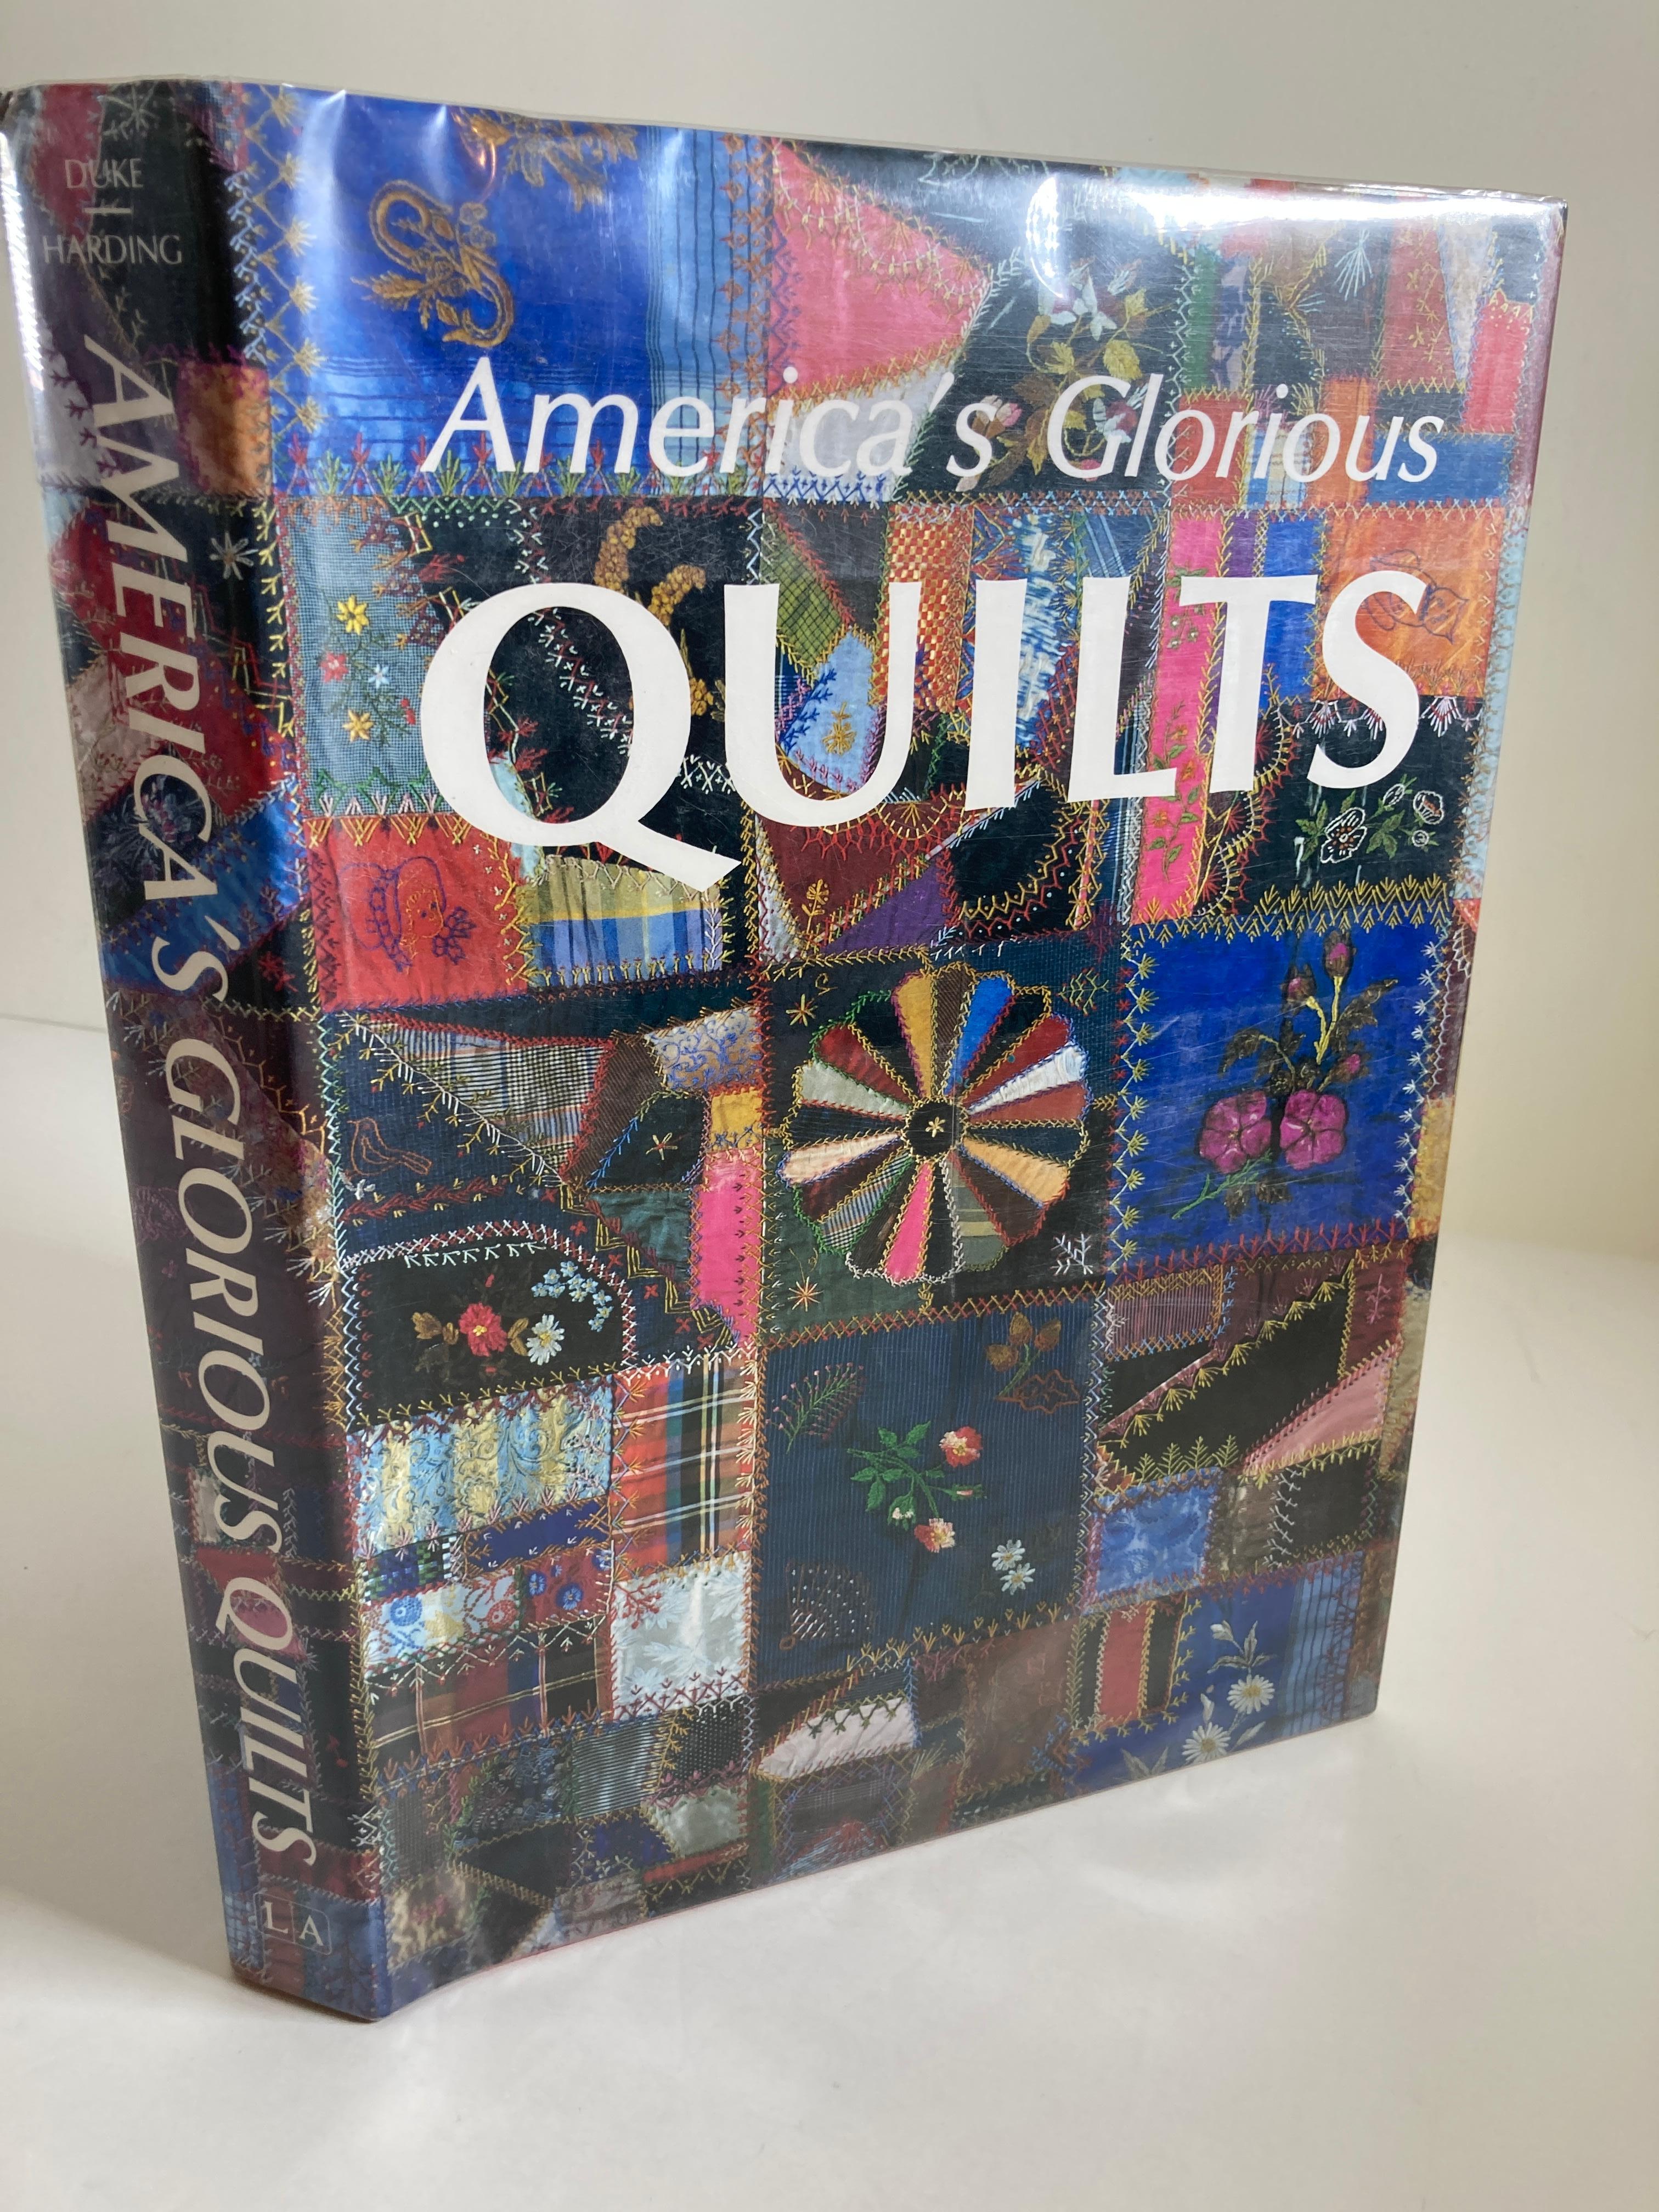 Arts and Crafts America's Glorious Quilts by Dennis Duke, Hardcover Book For Sale